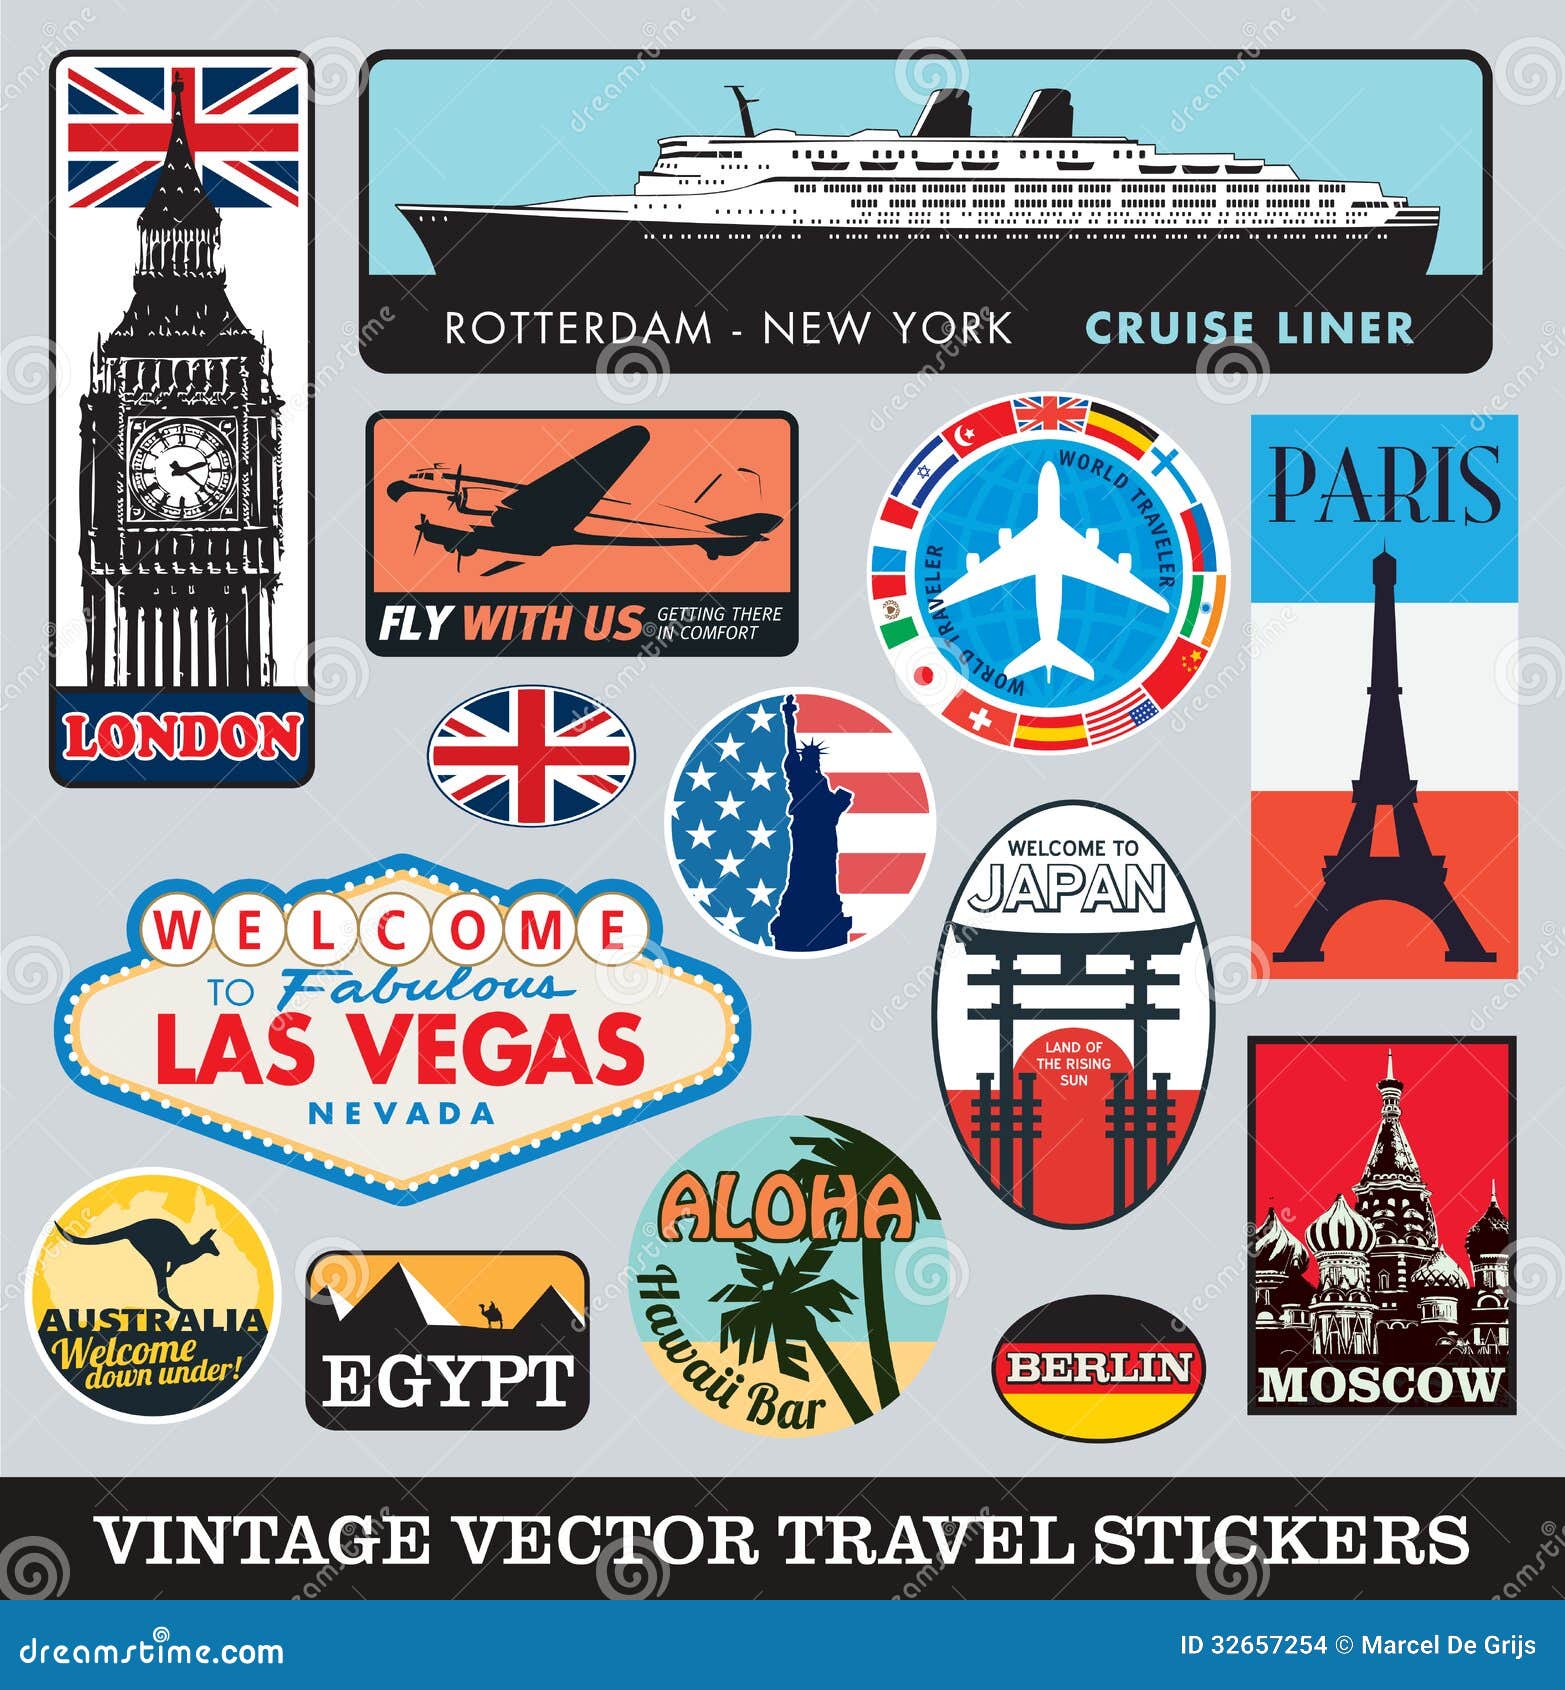 Vinyl Sticker Luggage Label State of Delaware Vintage Style Travel Decal 